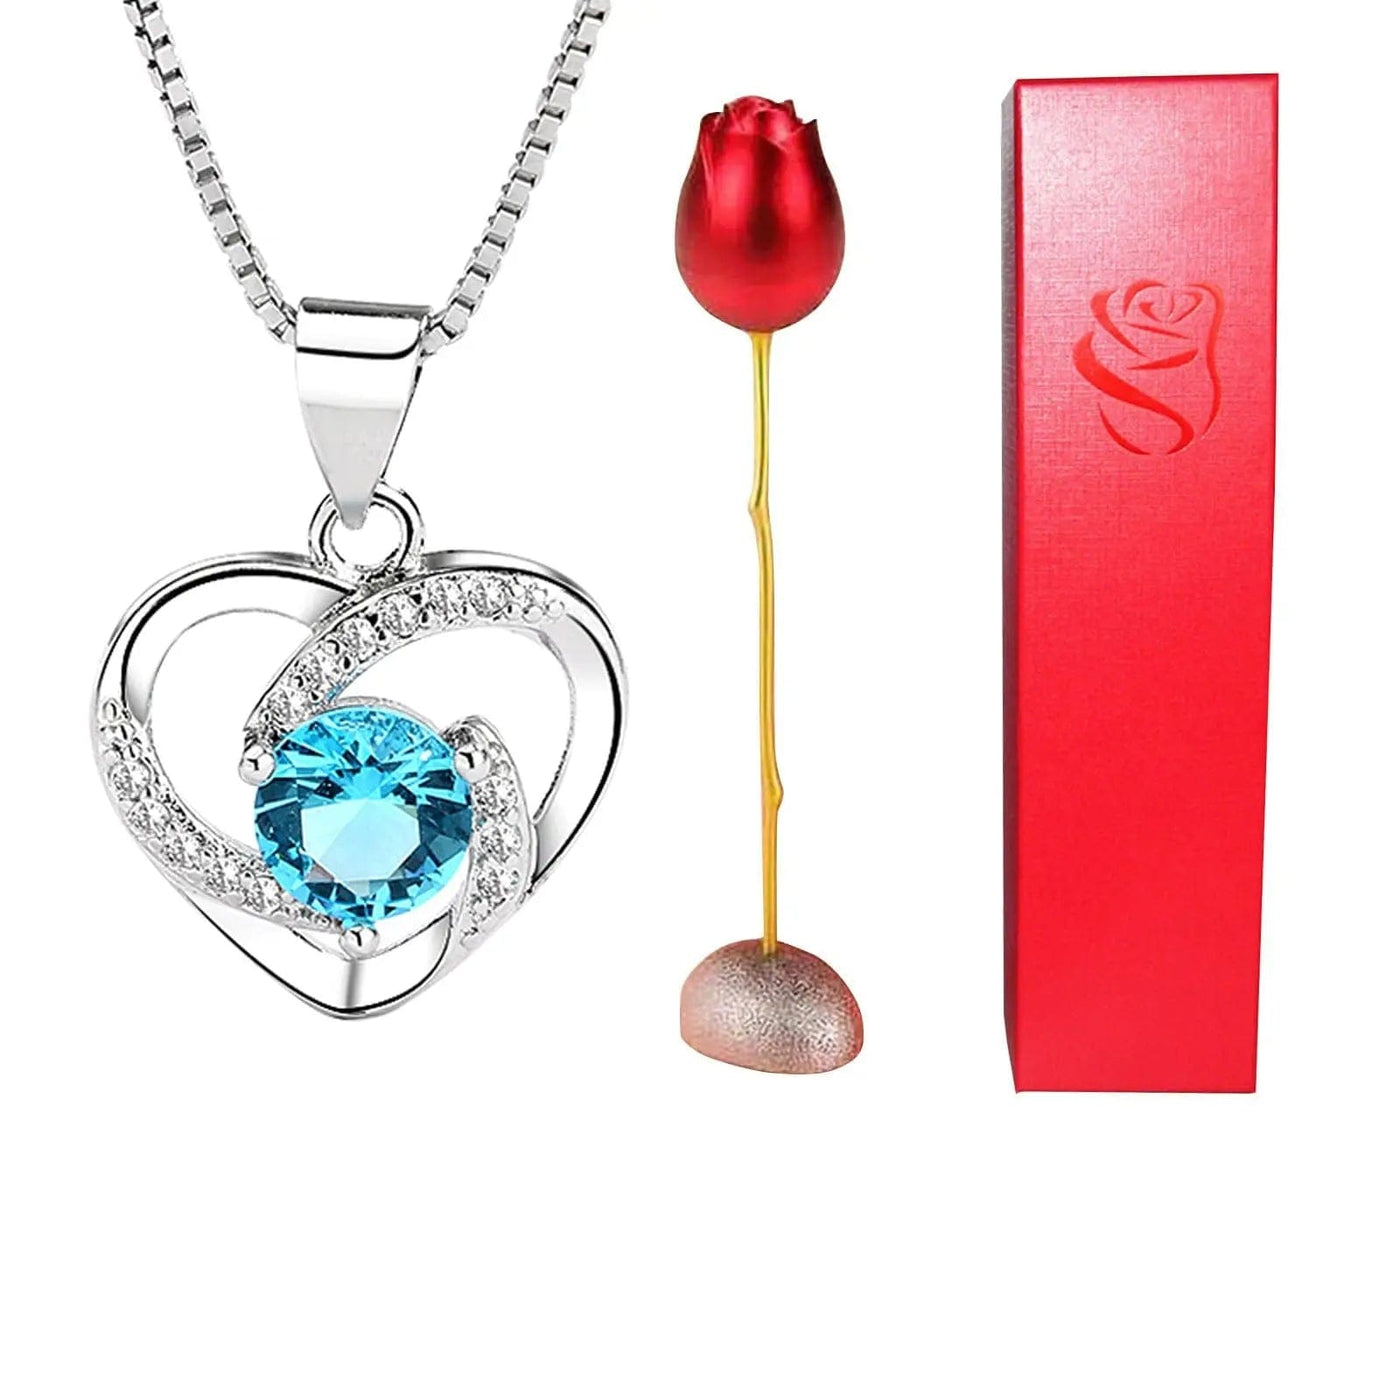 BROOCHITON Necklaces style D heart-shaped crystal diamond pendant necklace